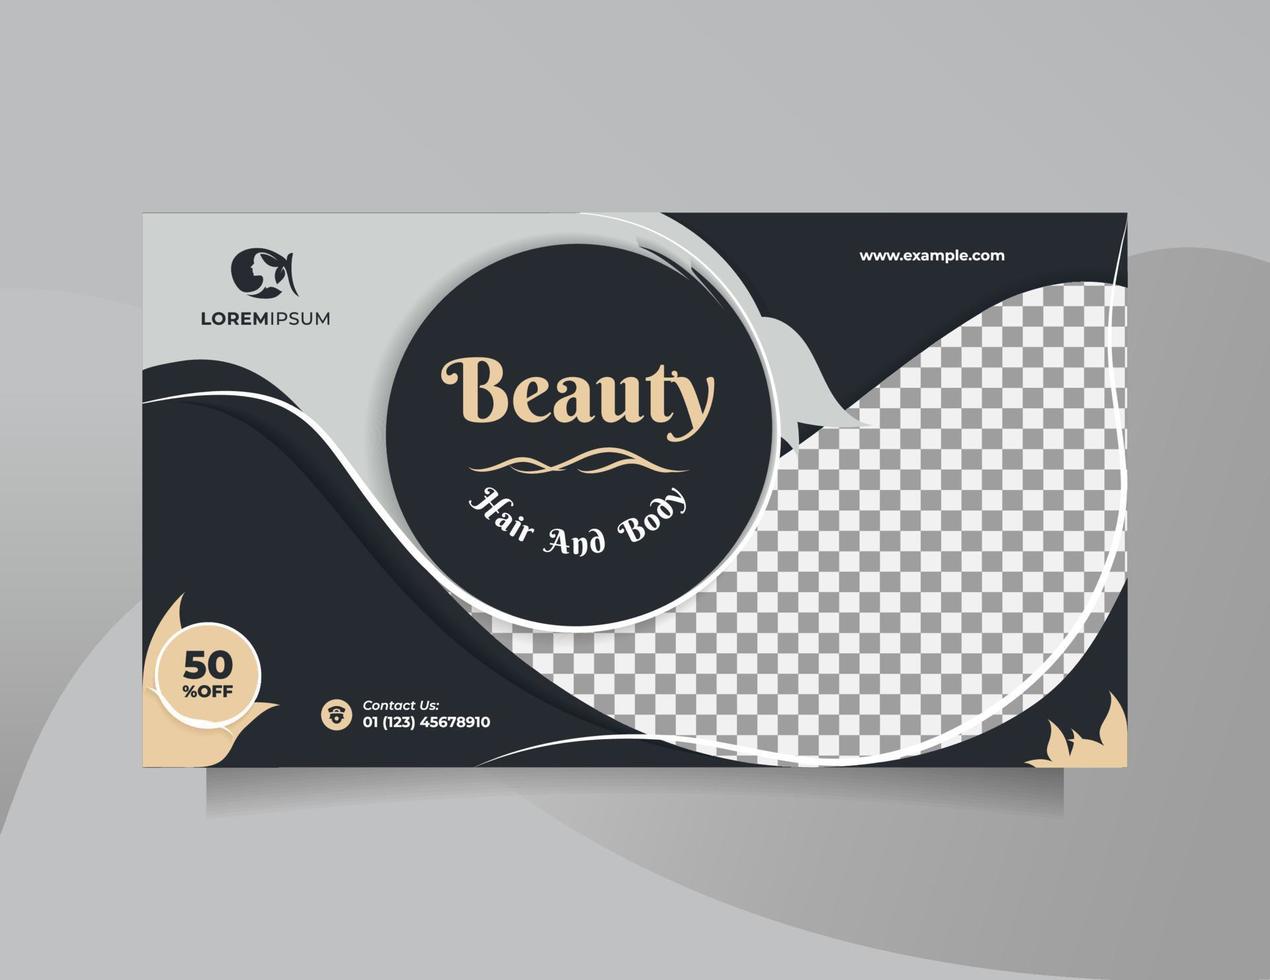 Landscape social media banner design for creative and modern beauty skin treatment center promotion. Vector template can be used for promotion of beauty products, fashion, cosmetic, something natural